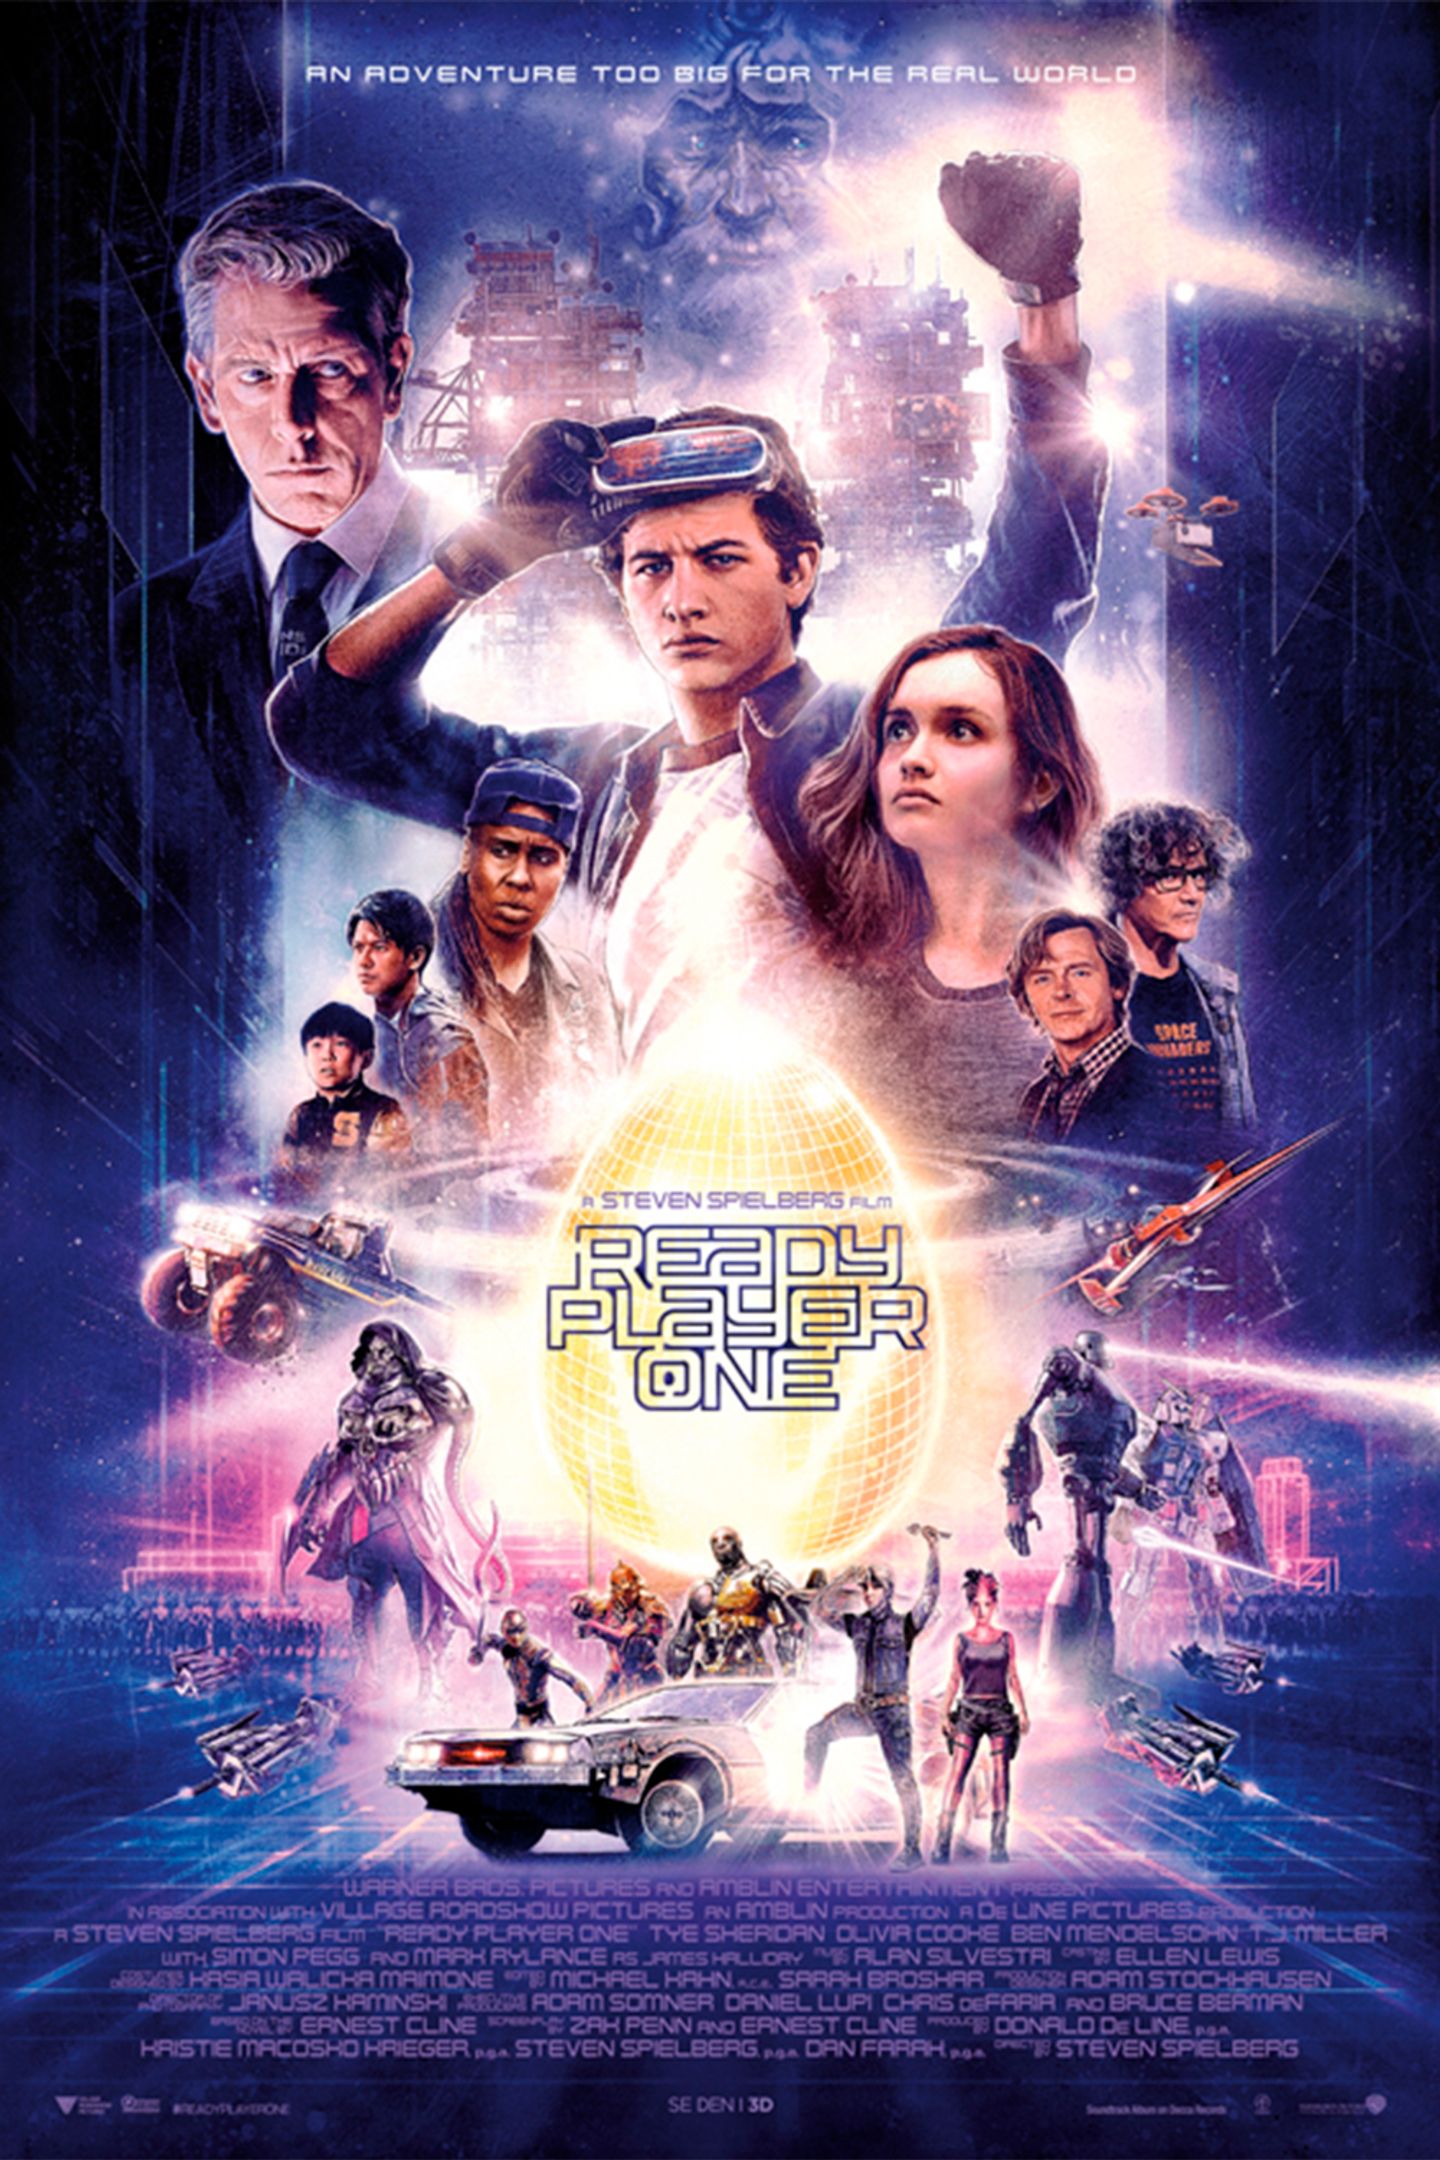 Plakat for 'Ready Player One'